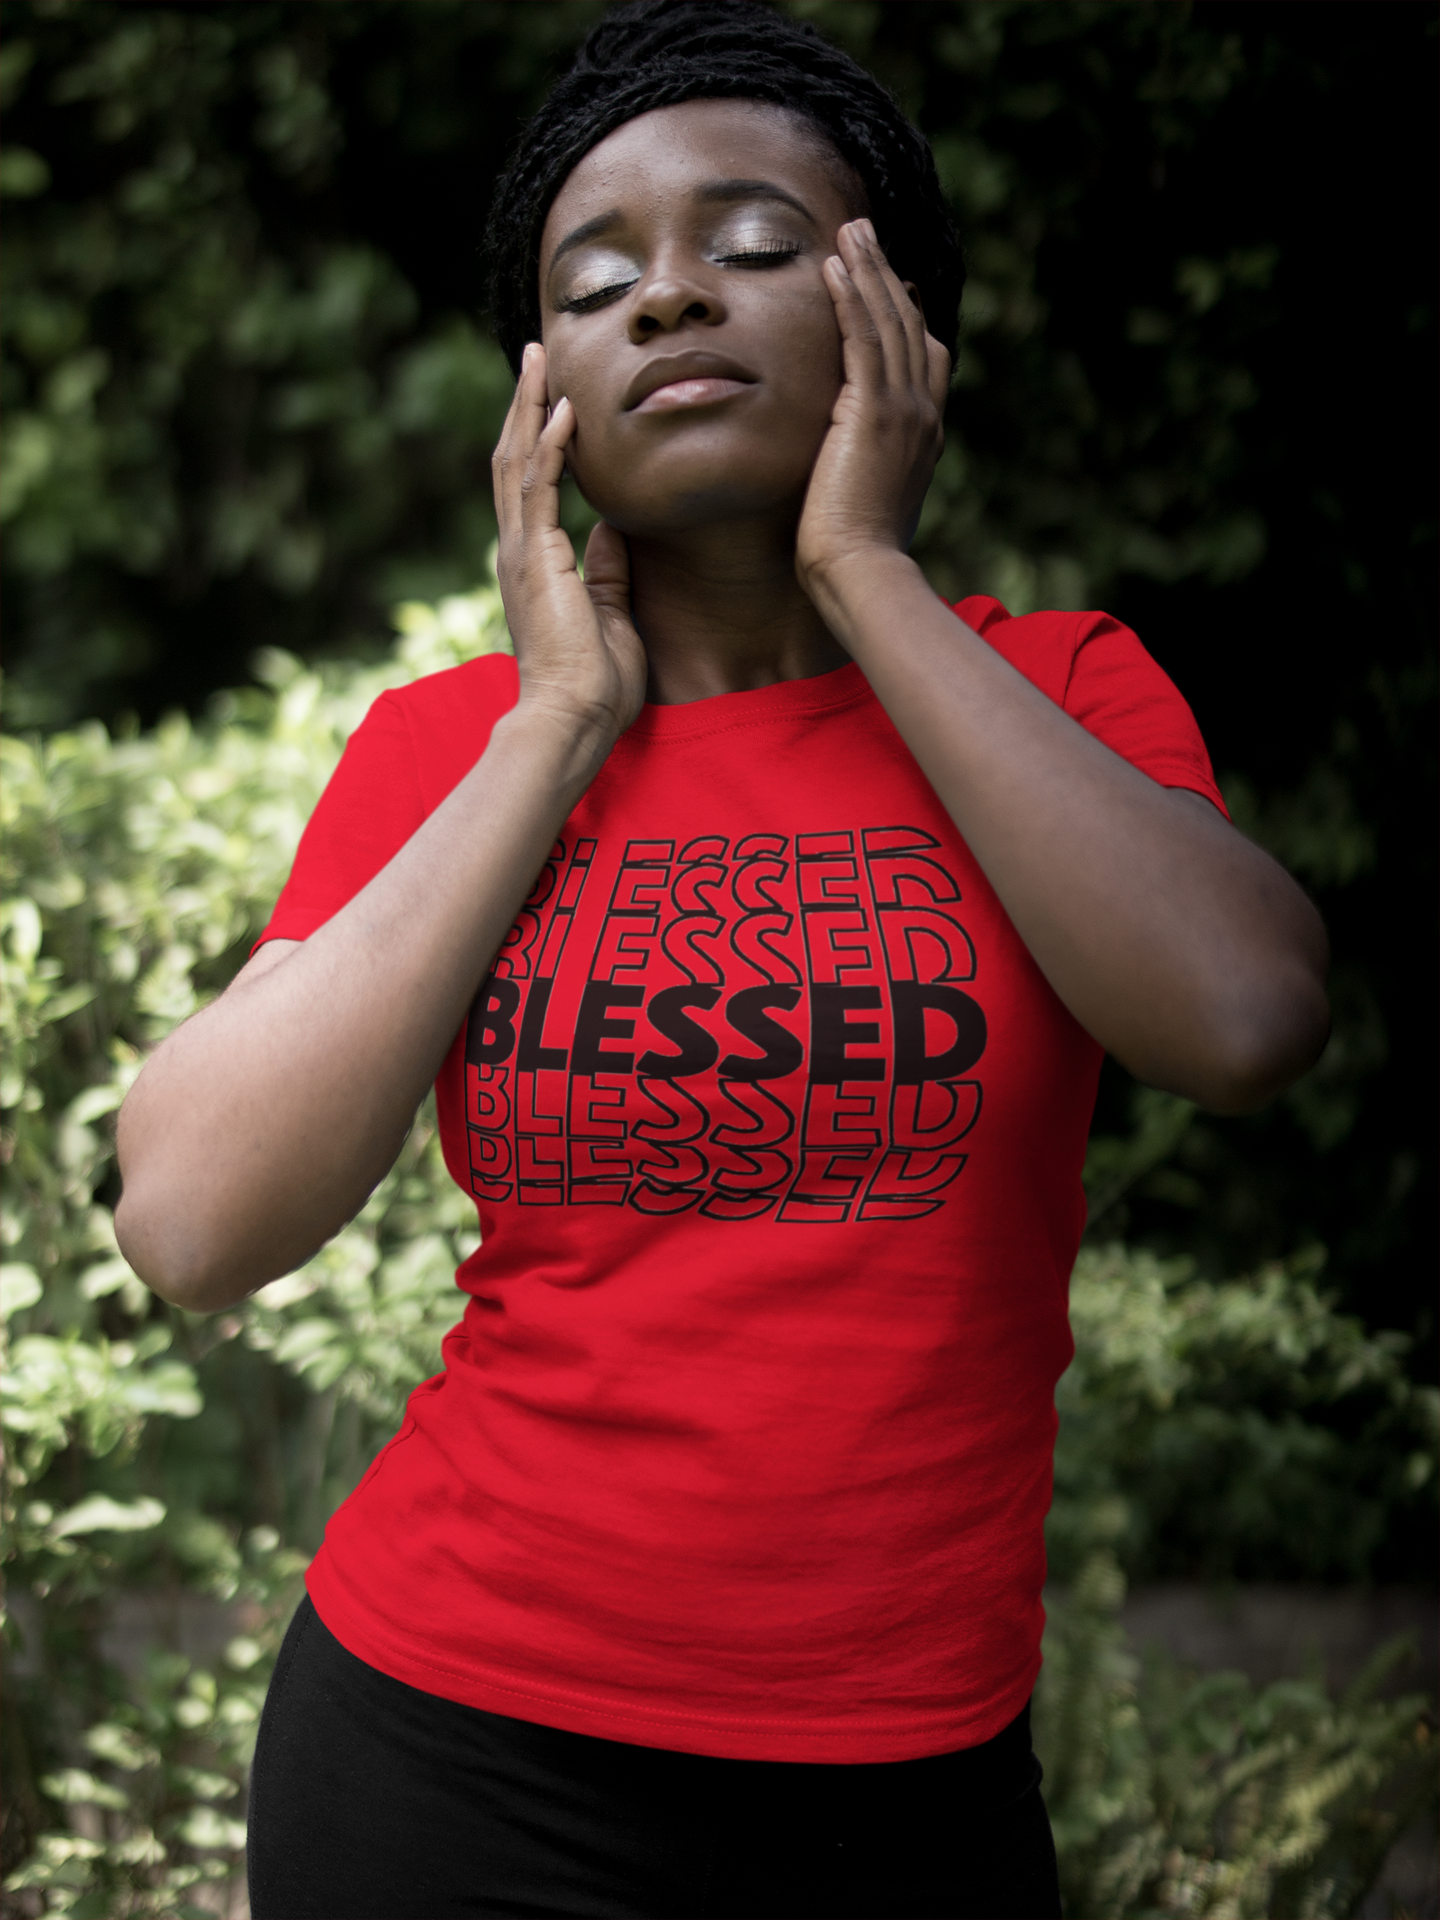 Blessed on Repeat T-shirt